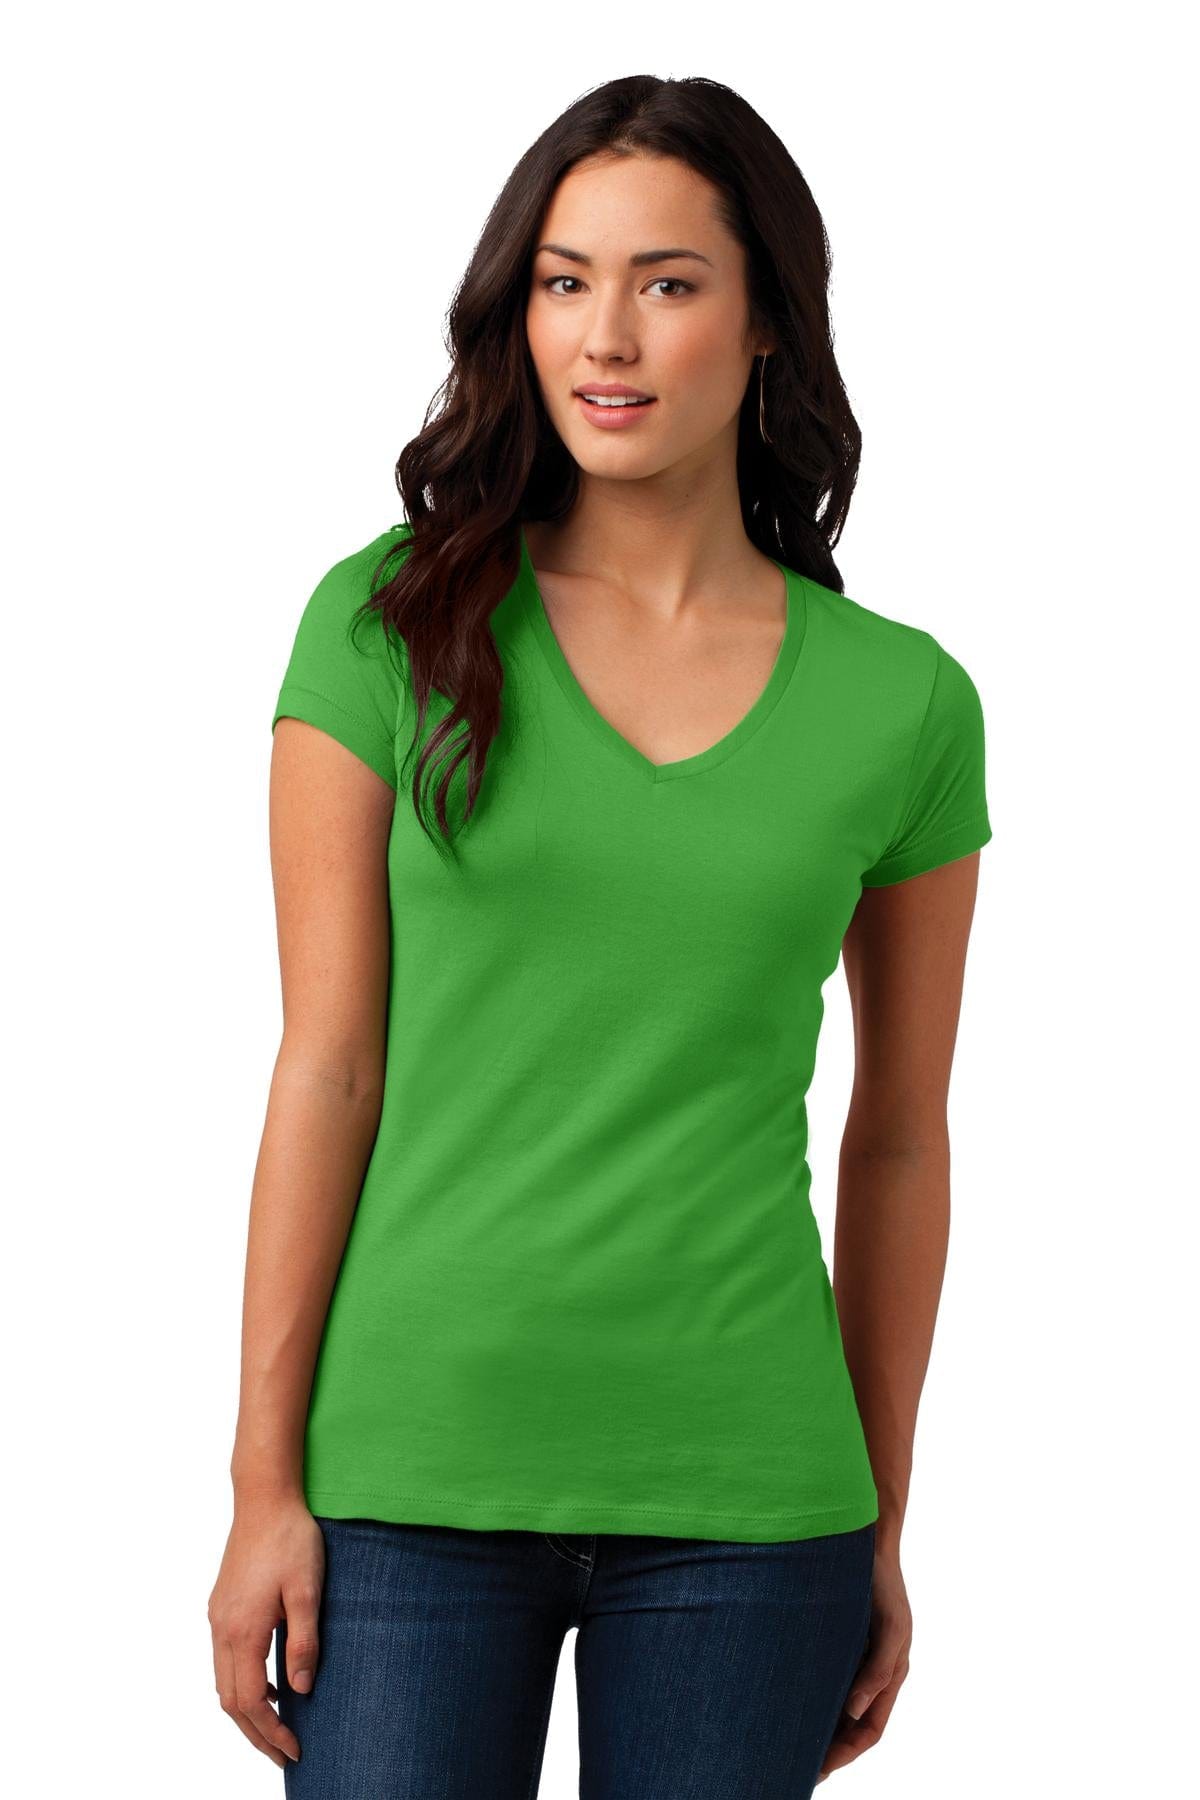 DISCONTINUED  District ®  Juniors Soft Wash V-Neck Tee. DT4501, Basic Colors